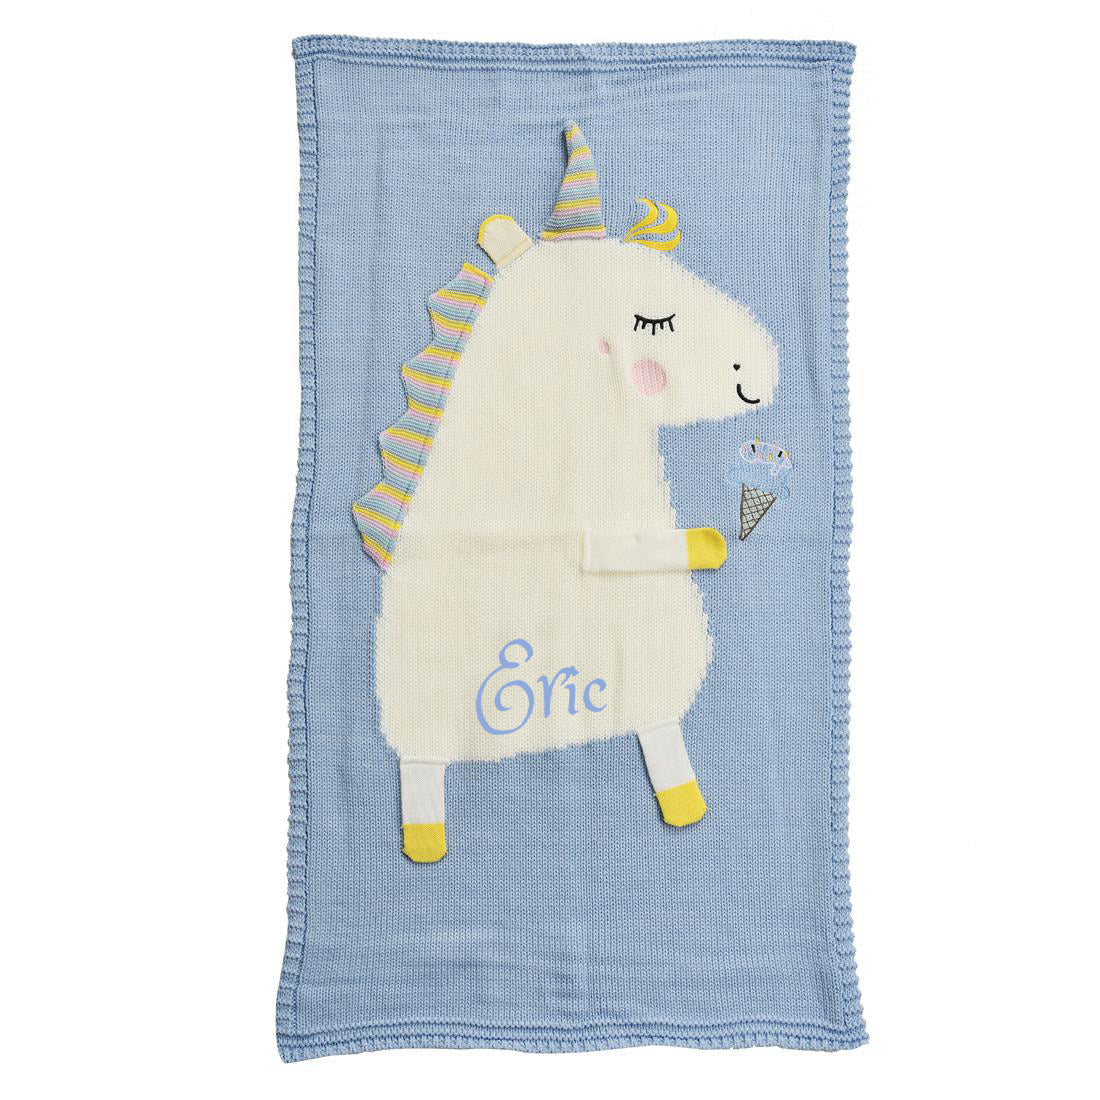 Personalized Knitted 100% Cotton Blue unicorn Blanket